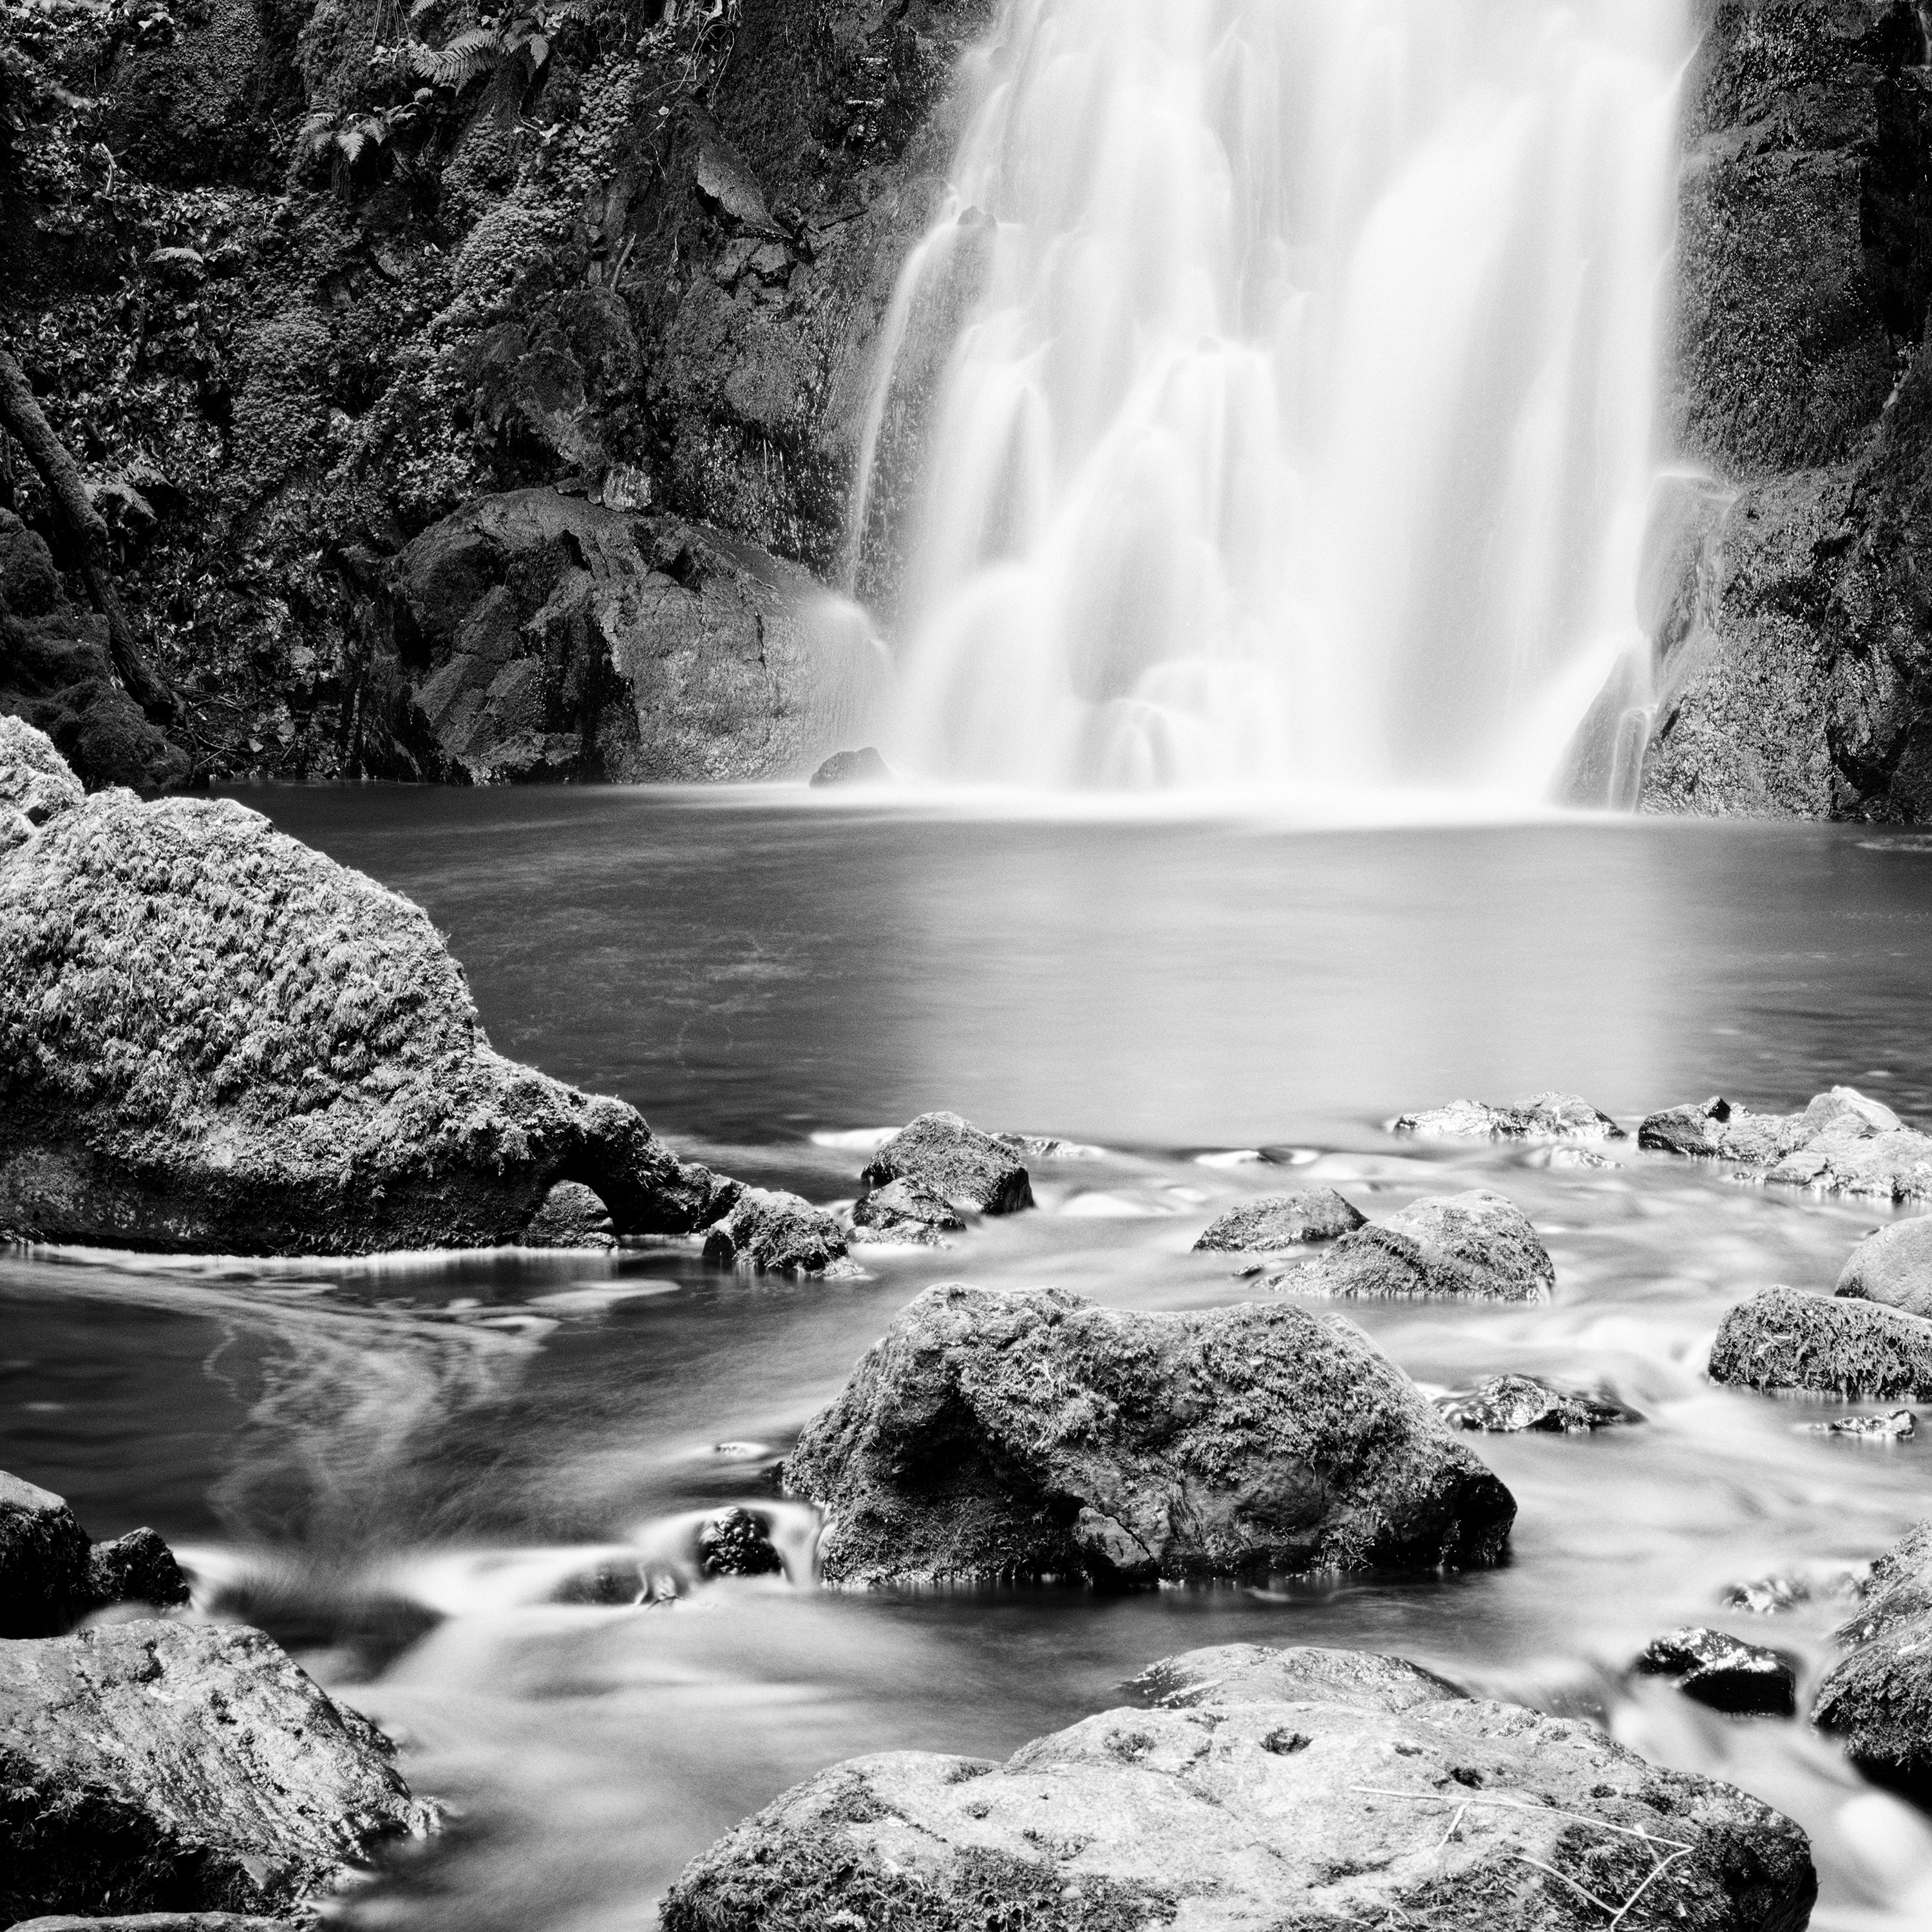 Glenoe Waterfall Ireland black and white waterscape landscape art photography For Sale 1